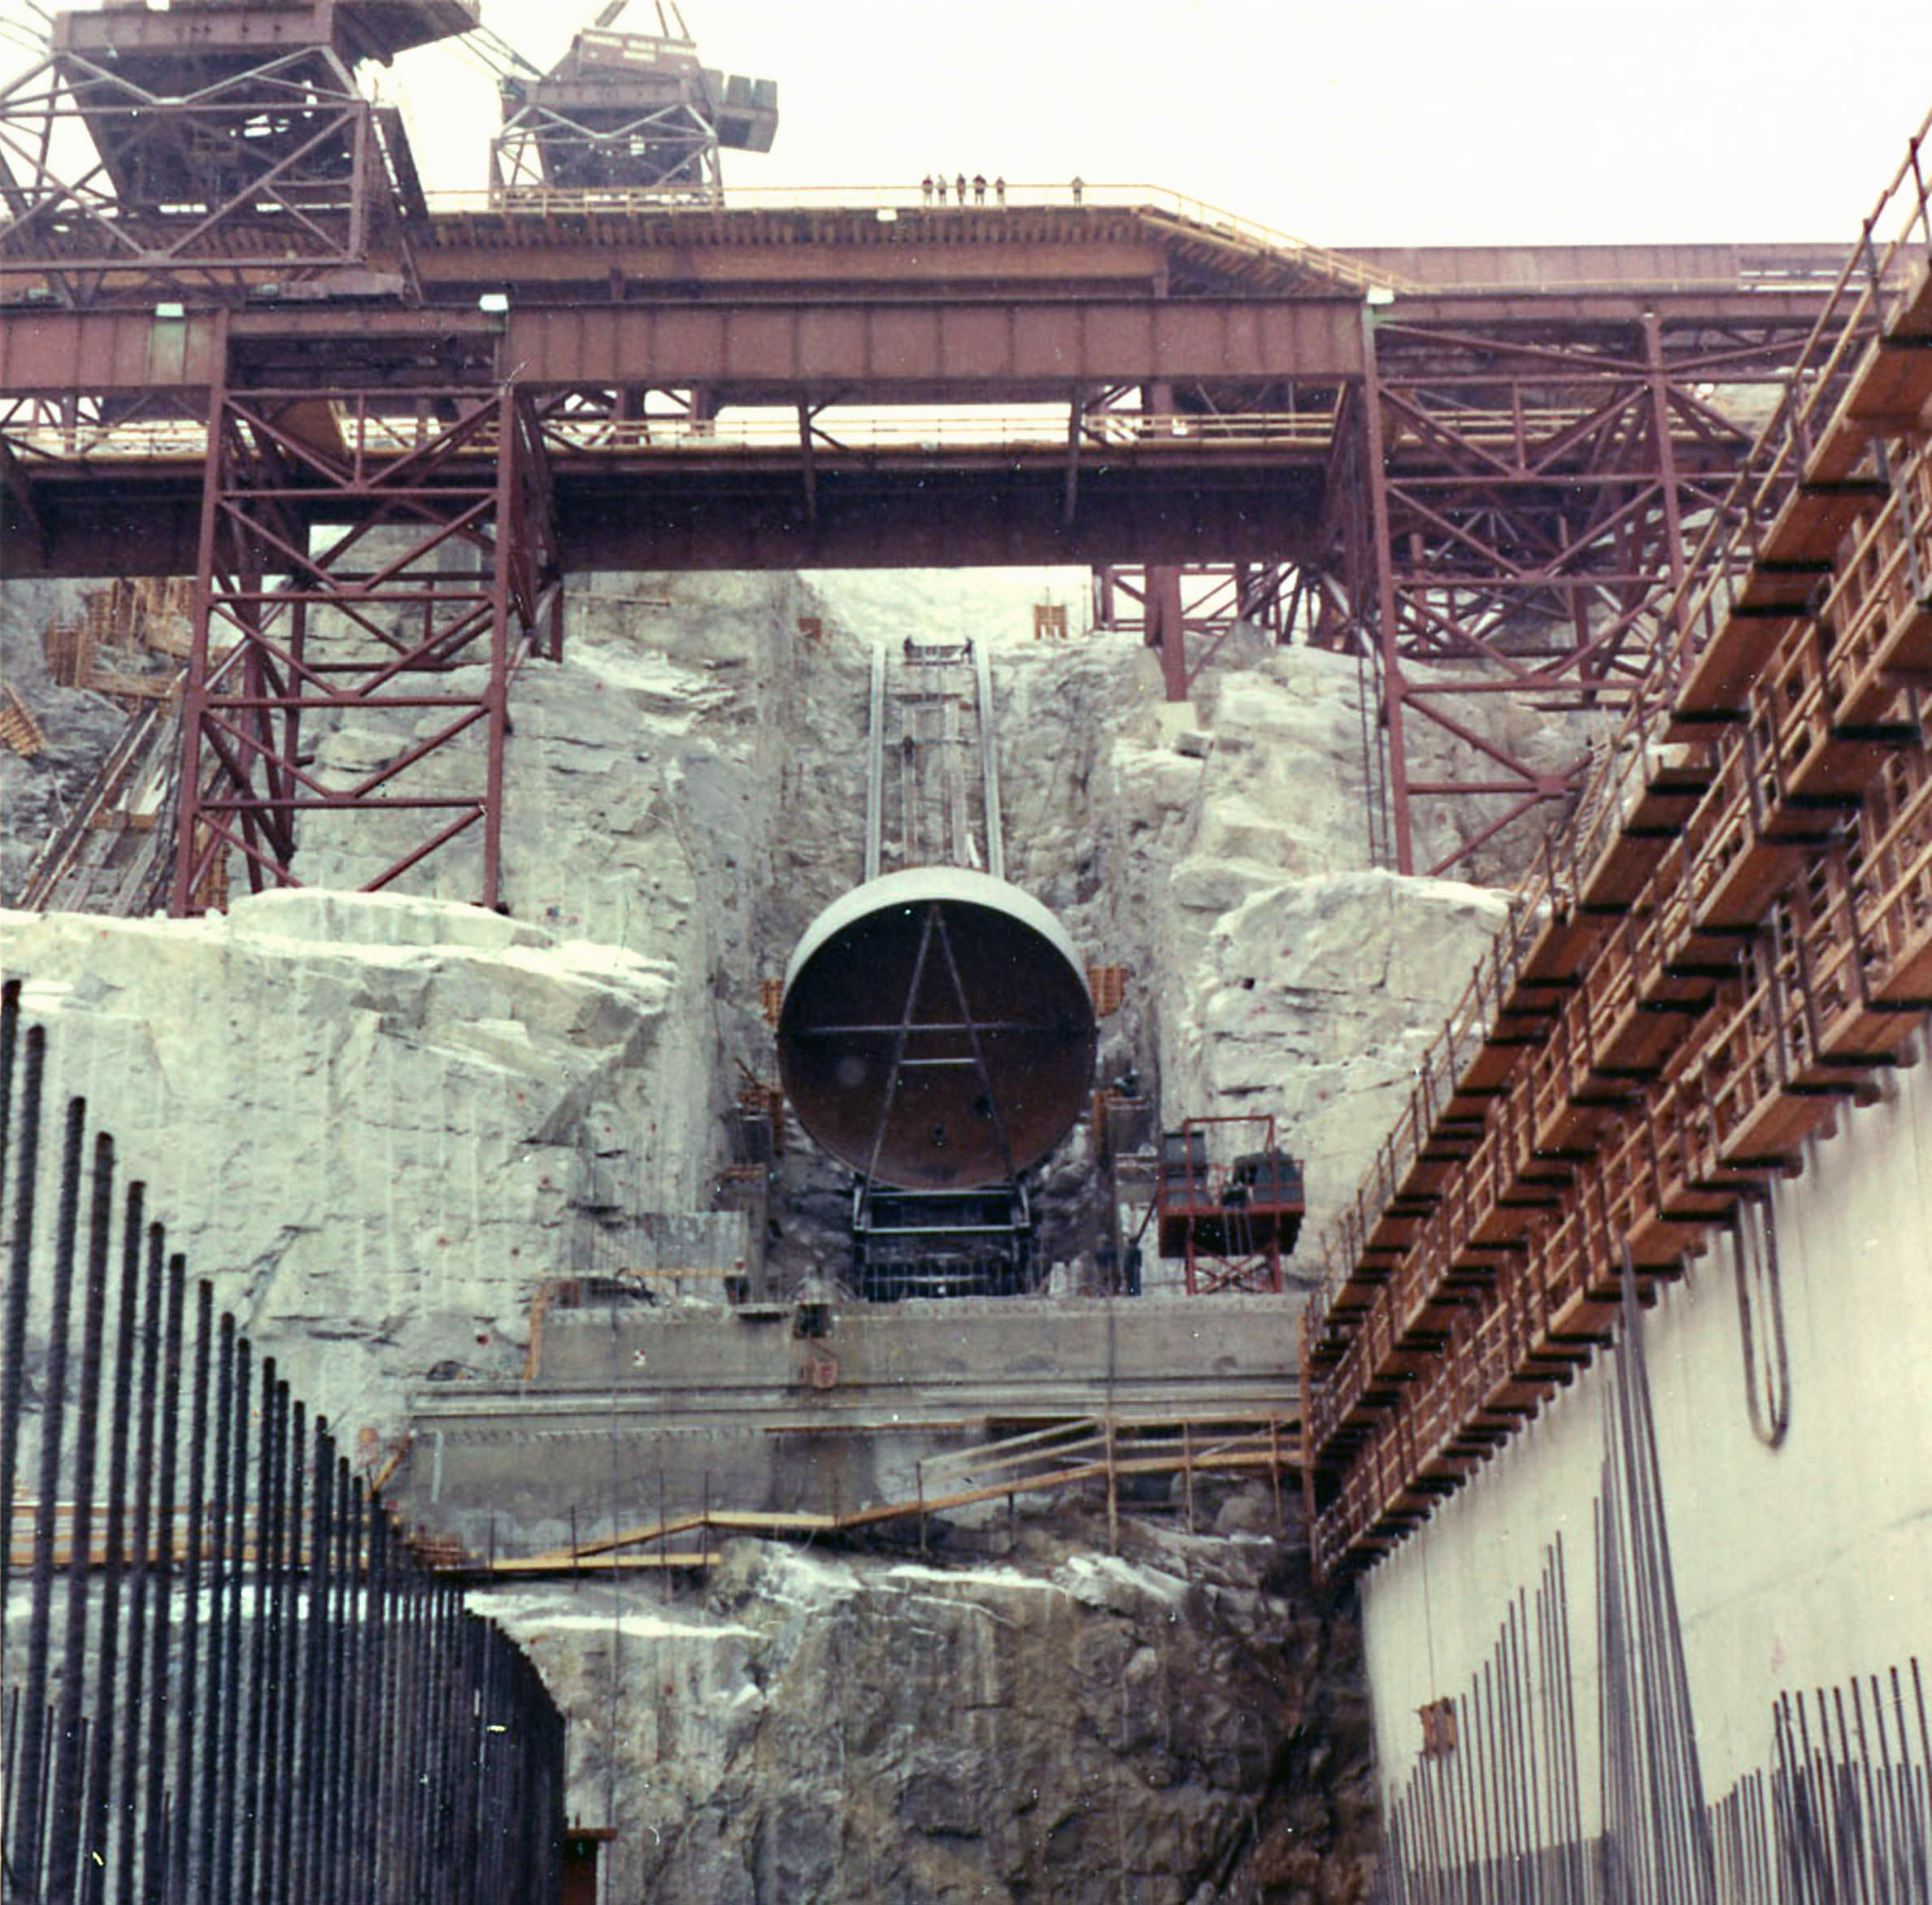 February 27, 1971. Placing a penstock section at Grand Coulee Dam, Nathaniel Washington Power Plant.